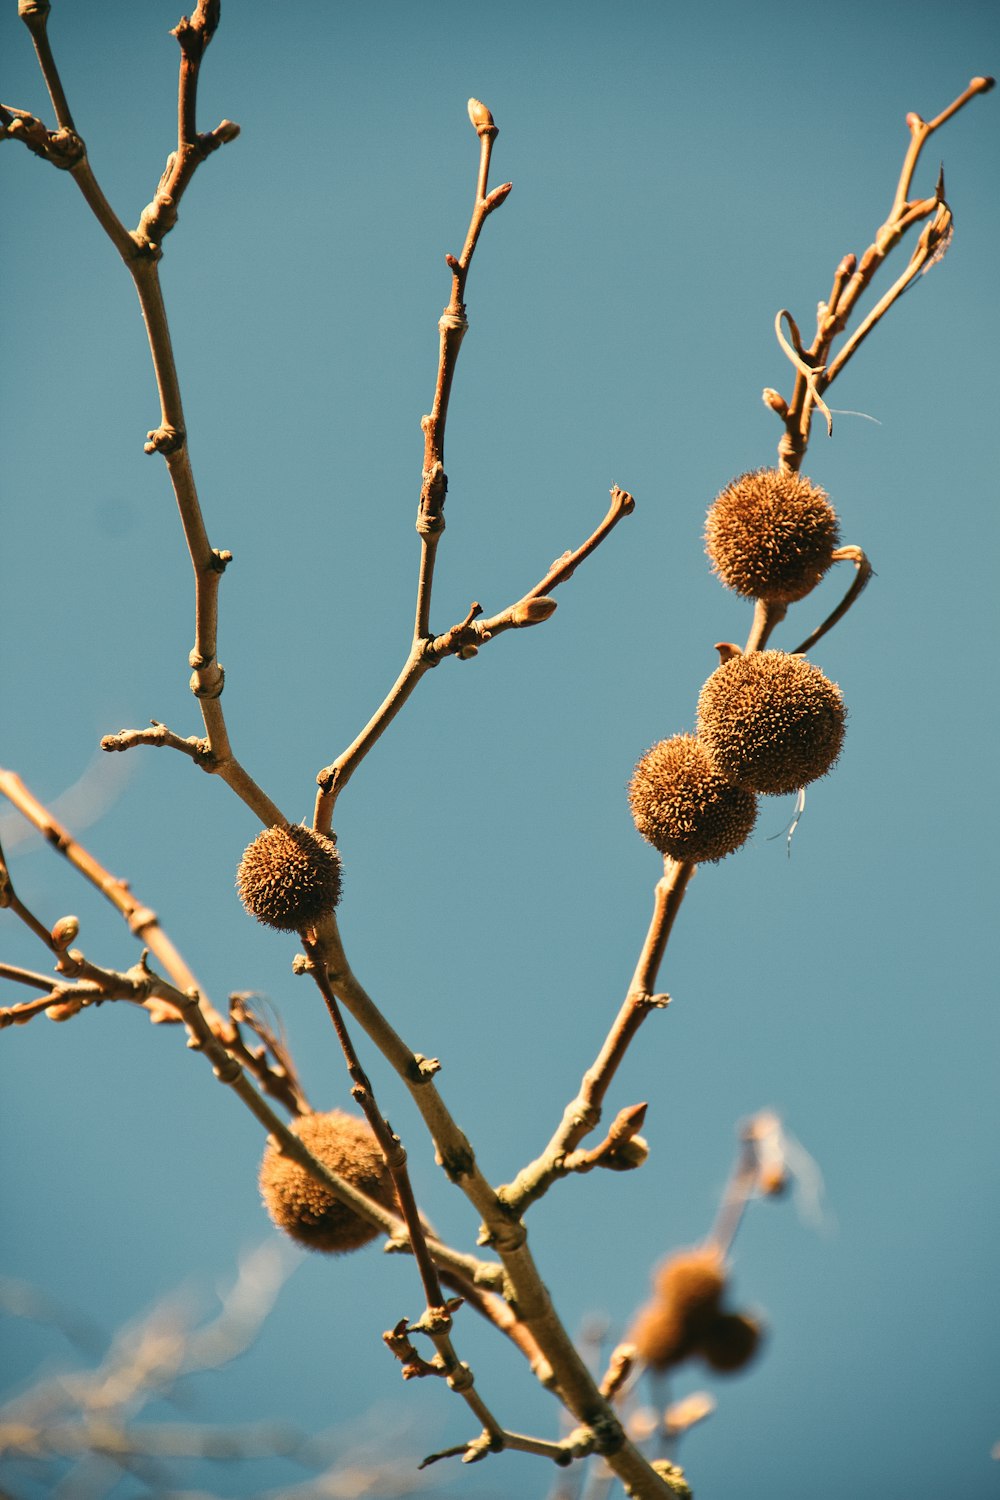 green and brown fruit on brown tree branch during daytime